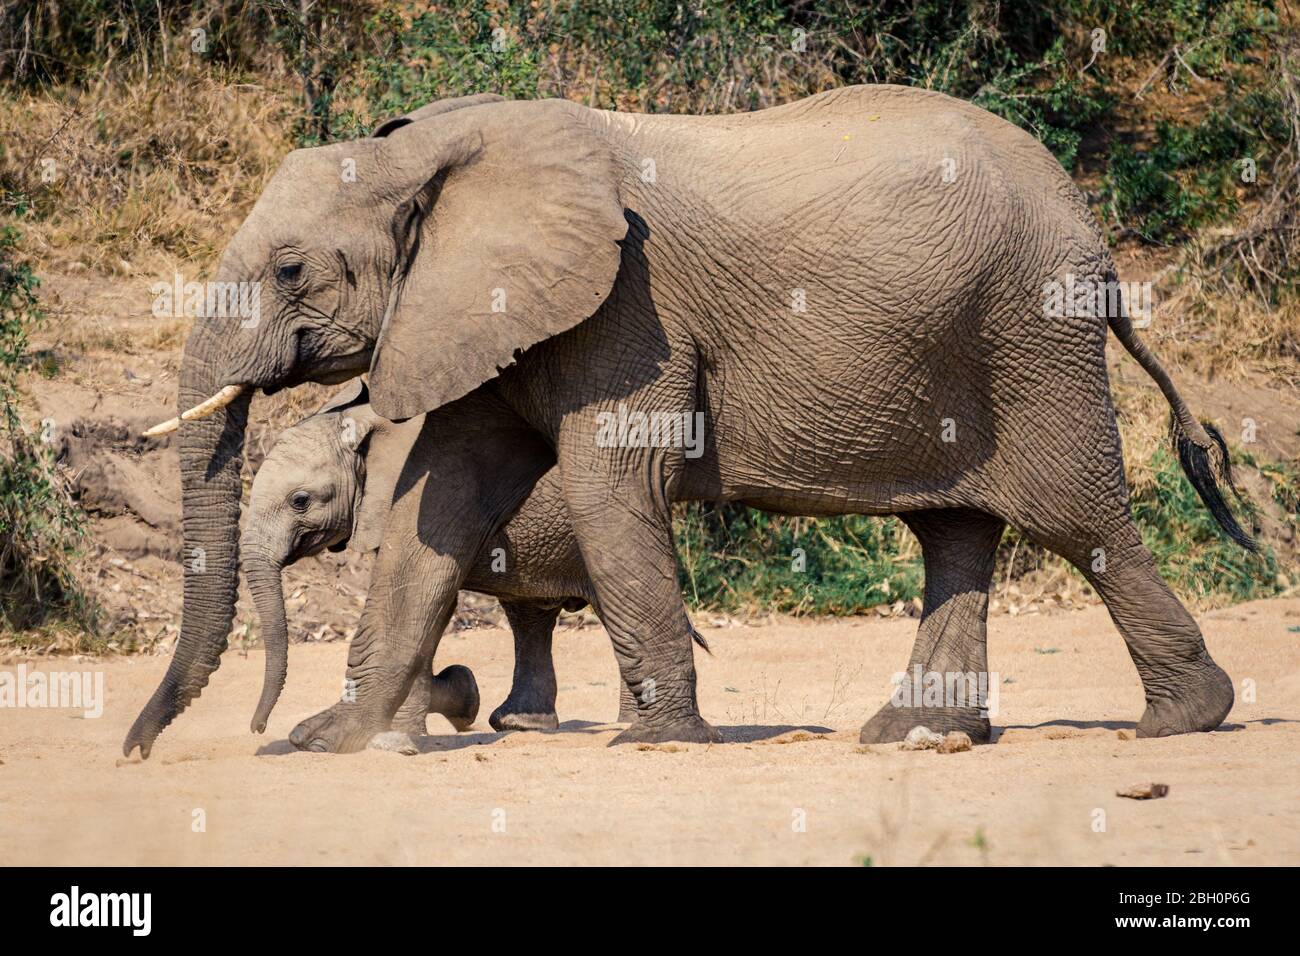 Wild bush mother elephant walking and protecting her young baby, Specie Loxodonta africana family of Elephantidae Kruger safari park South Africa Stock Photo